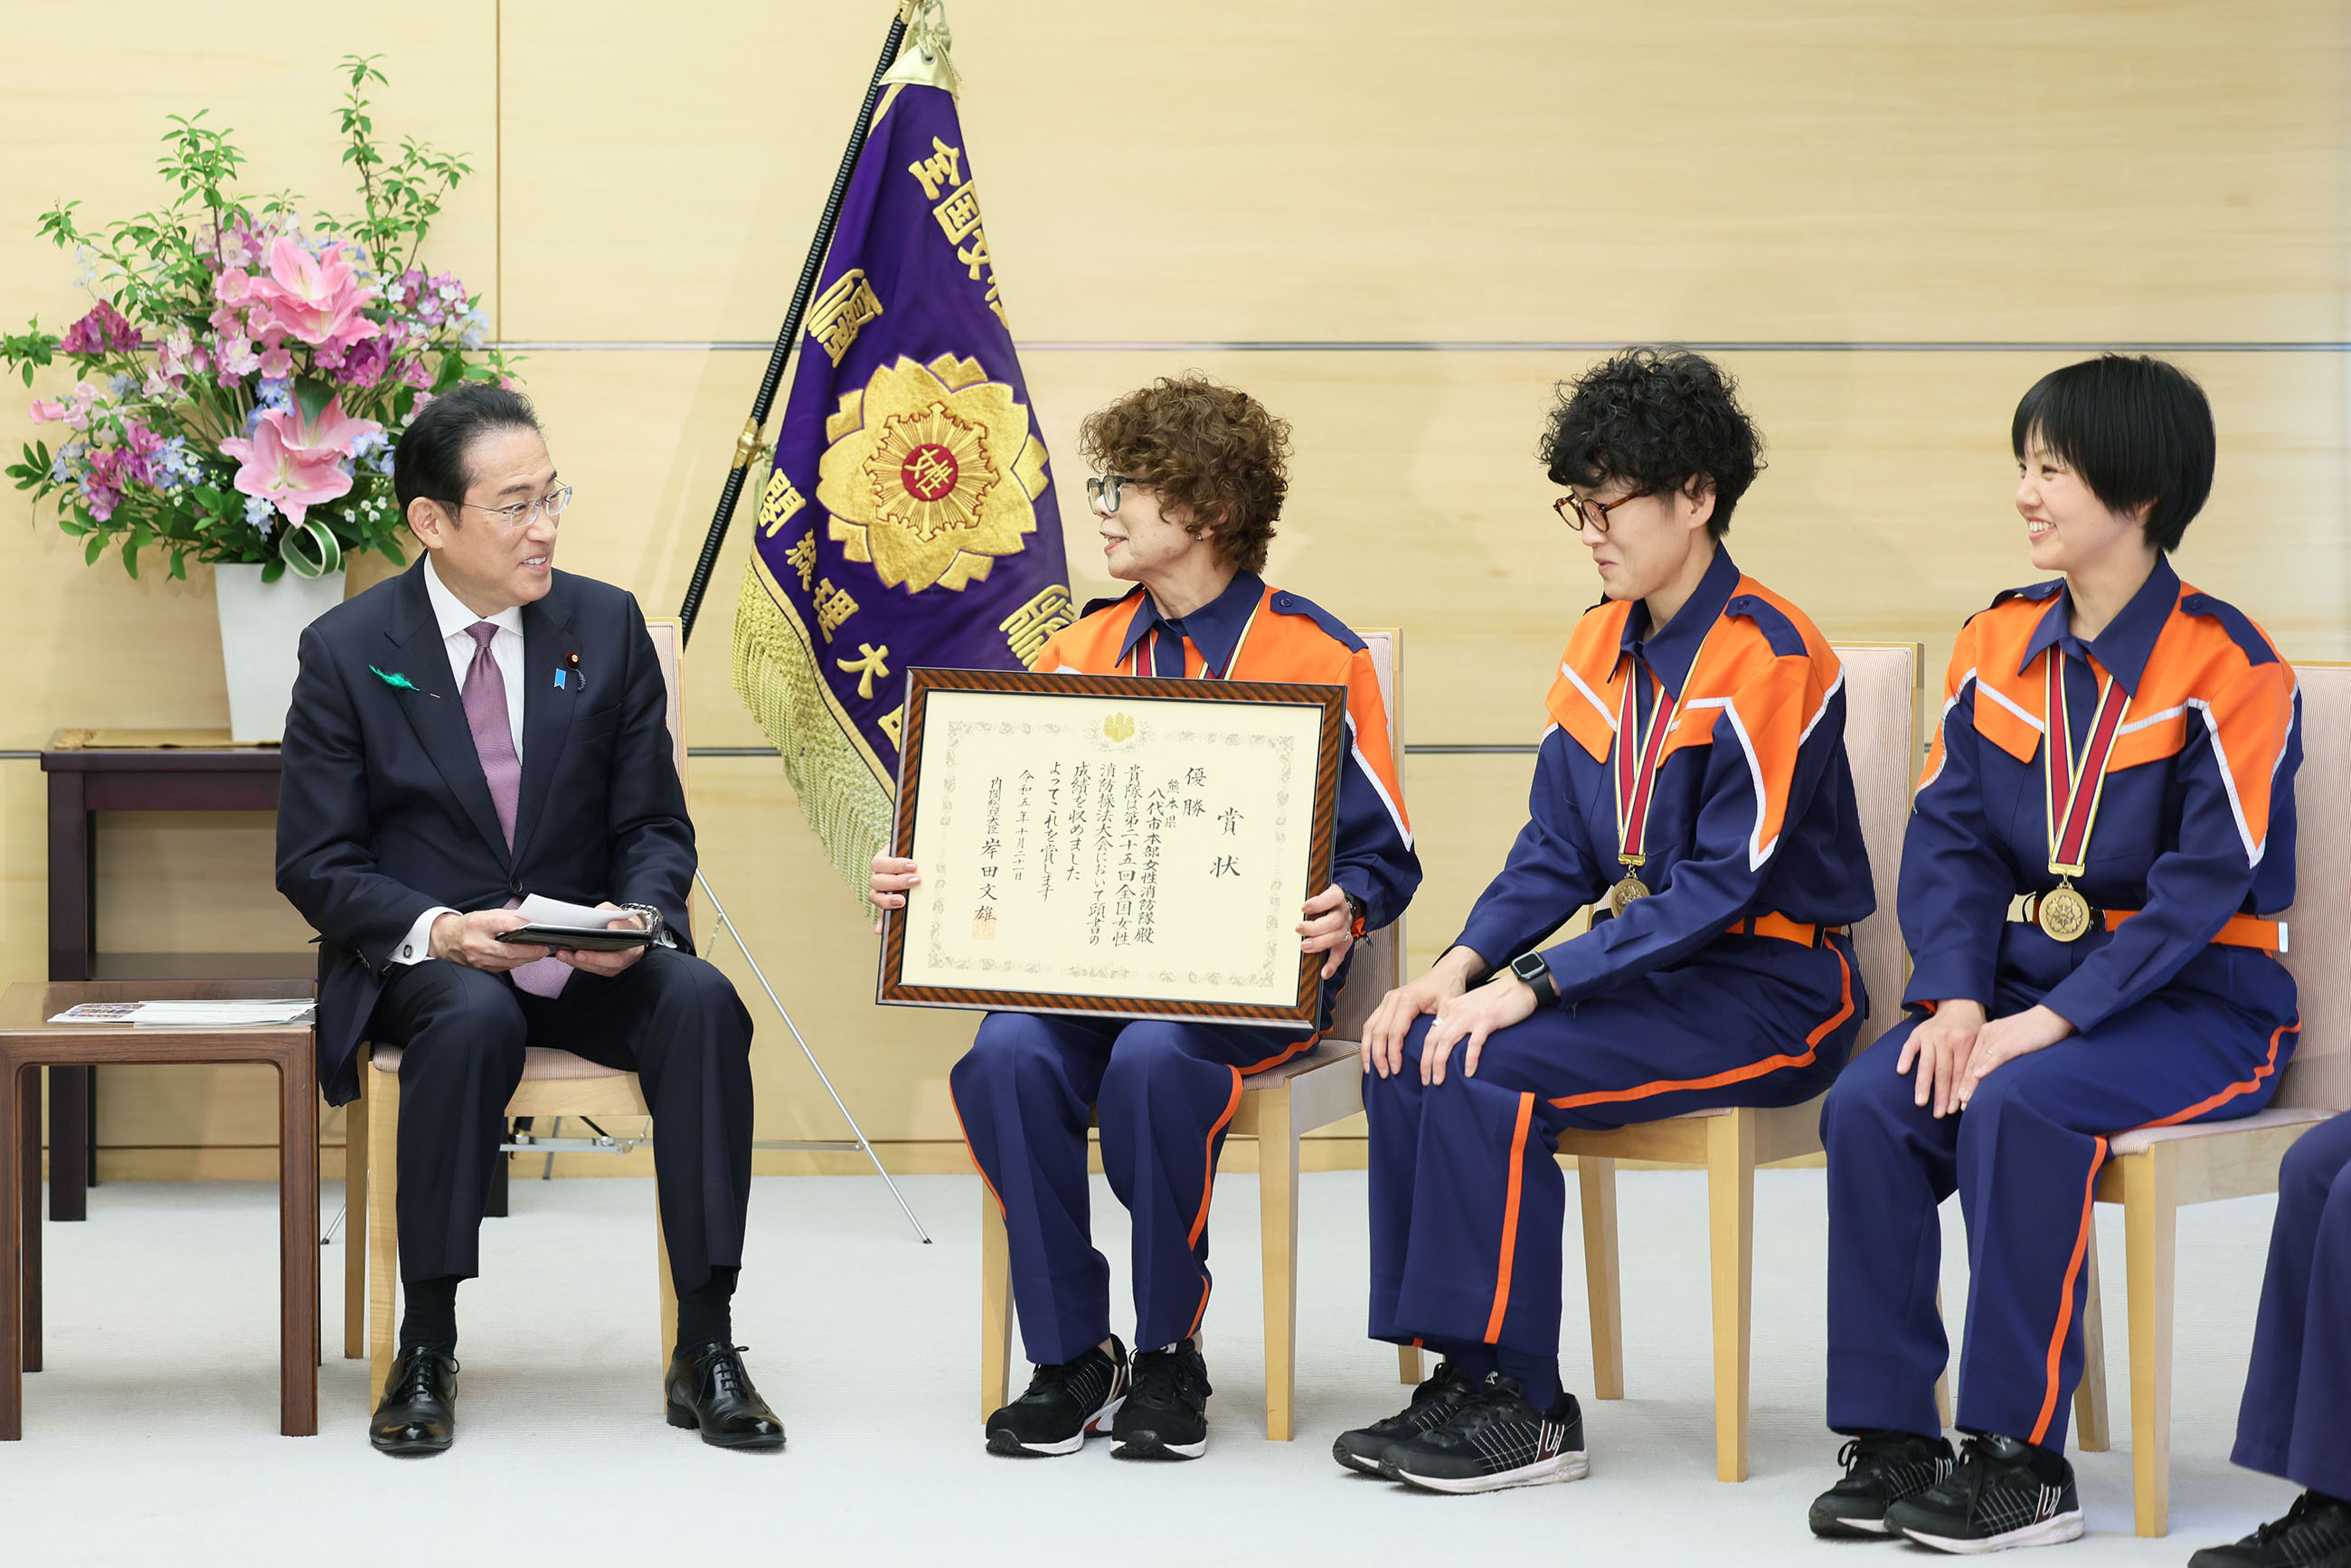 Courtesy Call from the Yatsushiro City Fire Corps (Female Firefighting Team) 